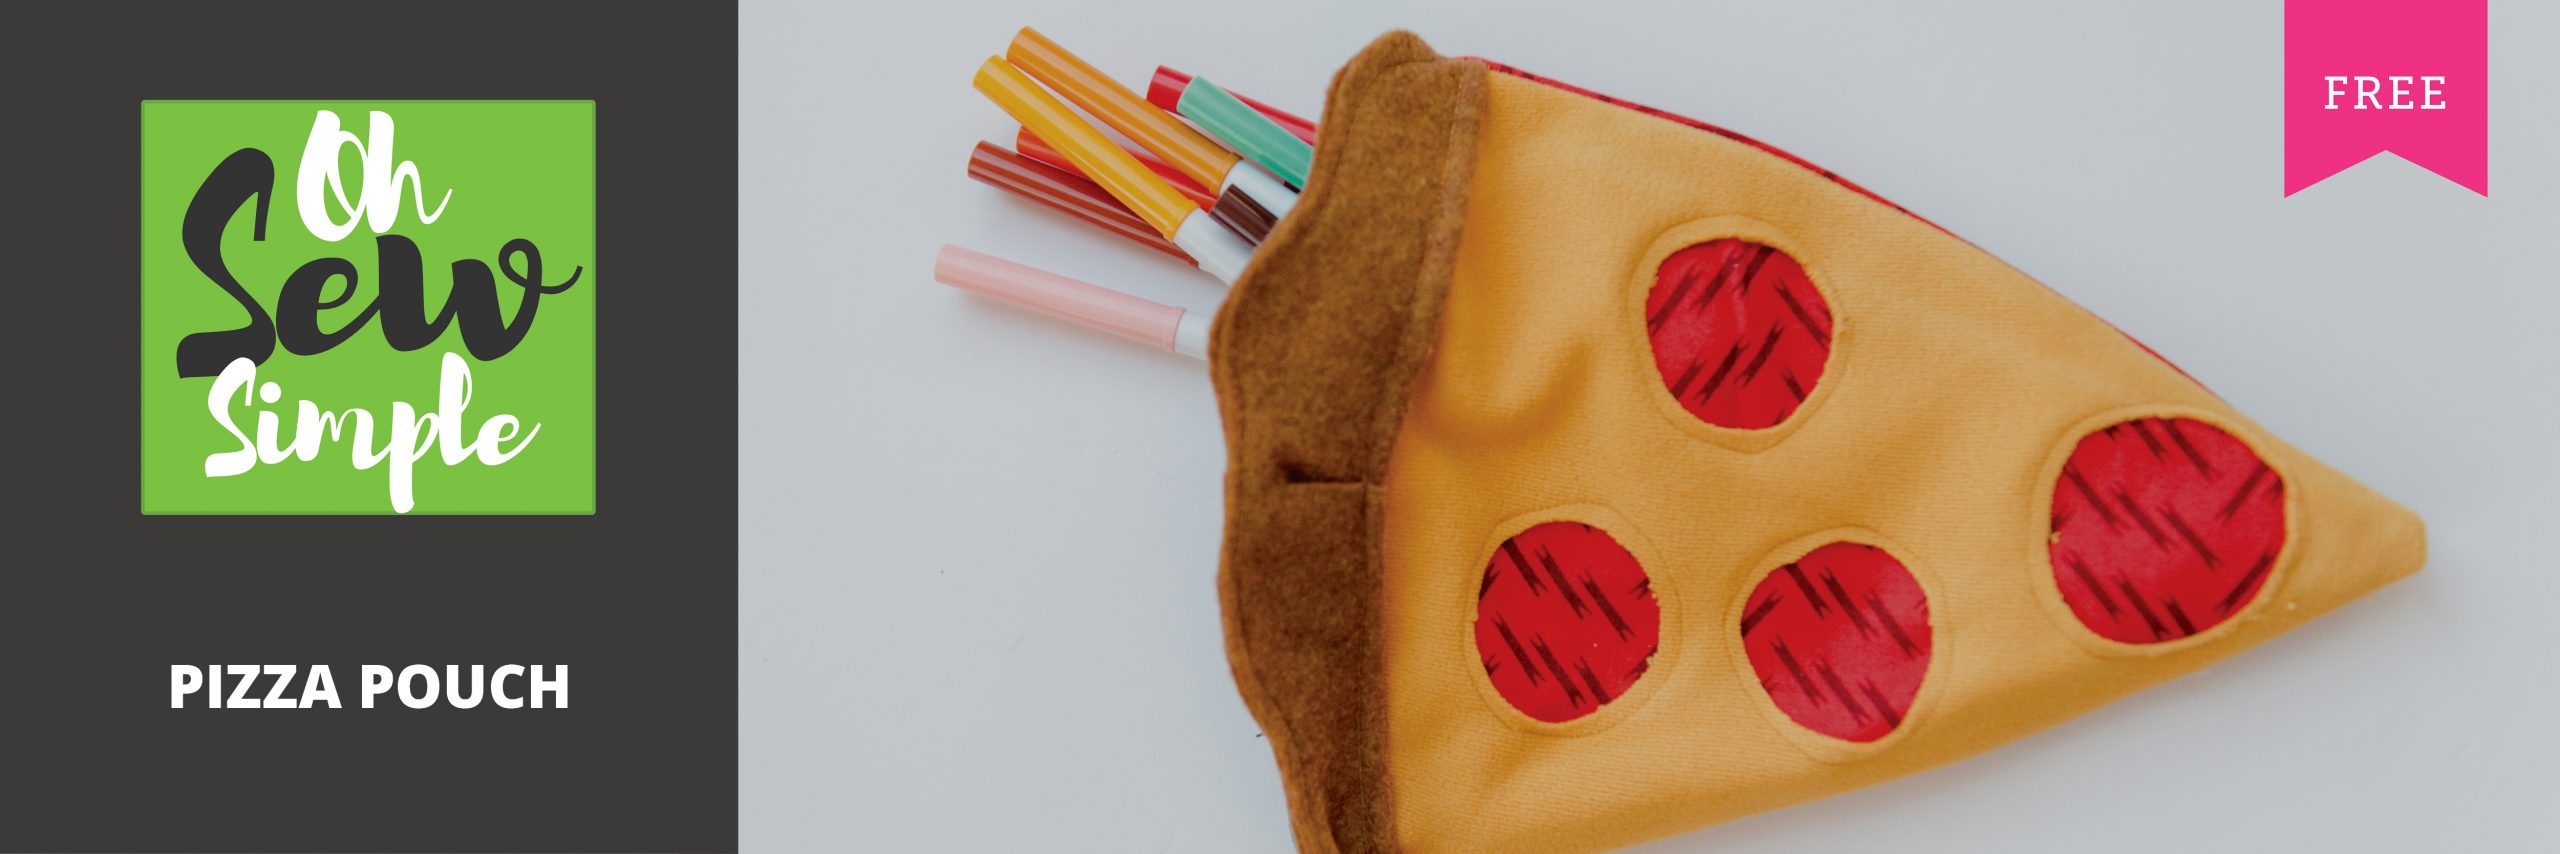 Pizza pouch